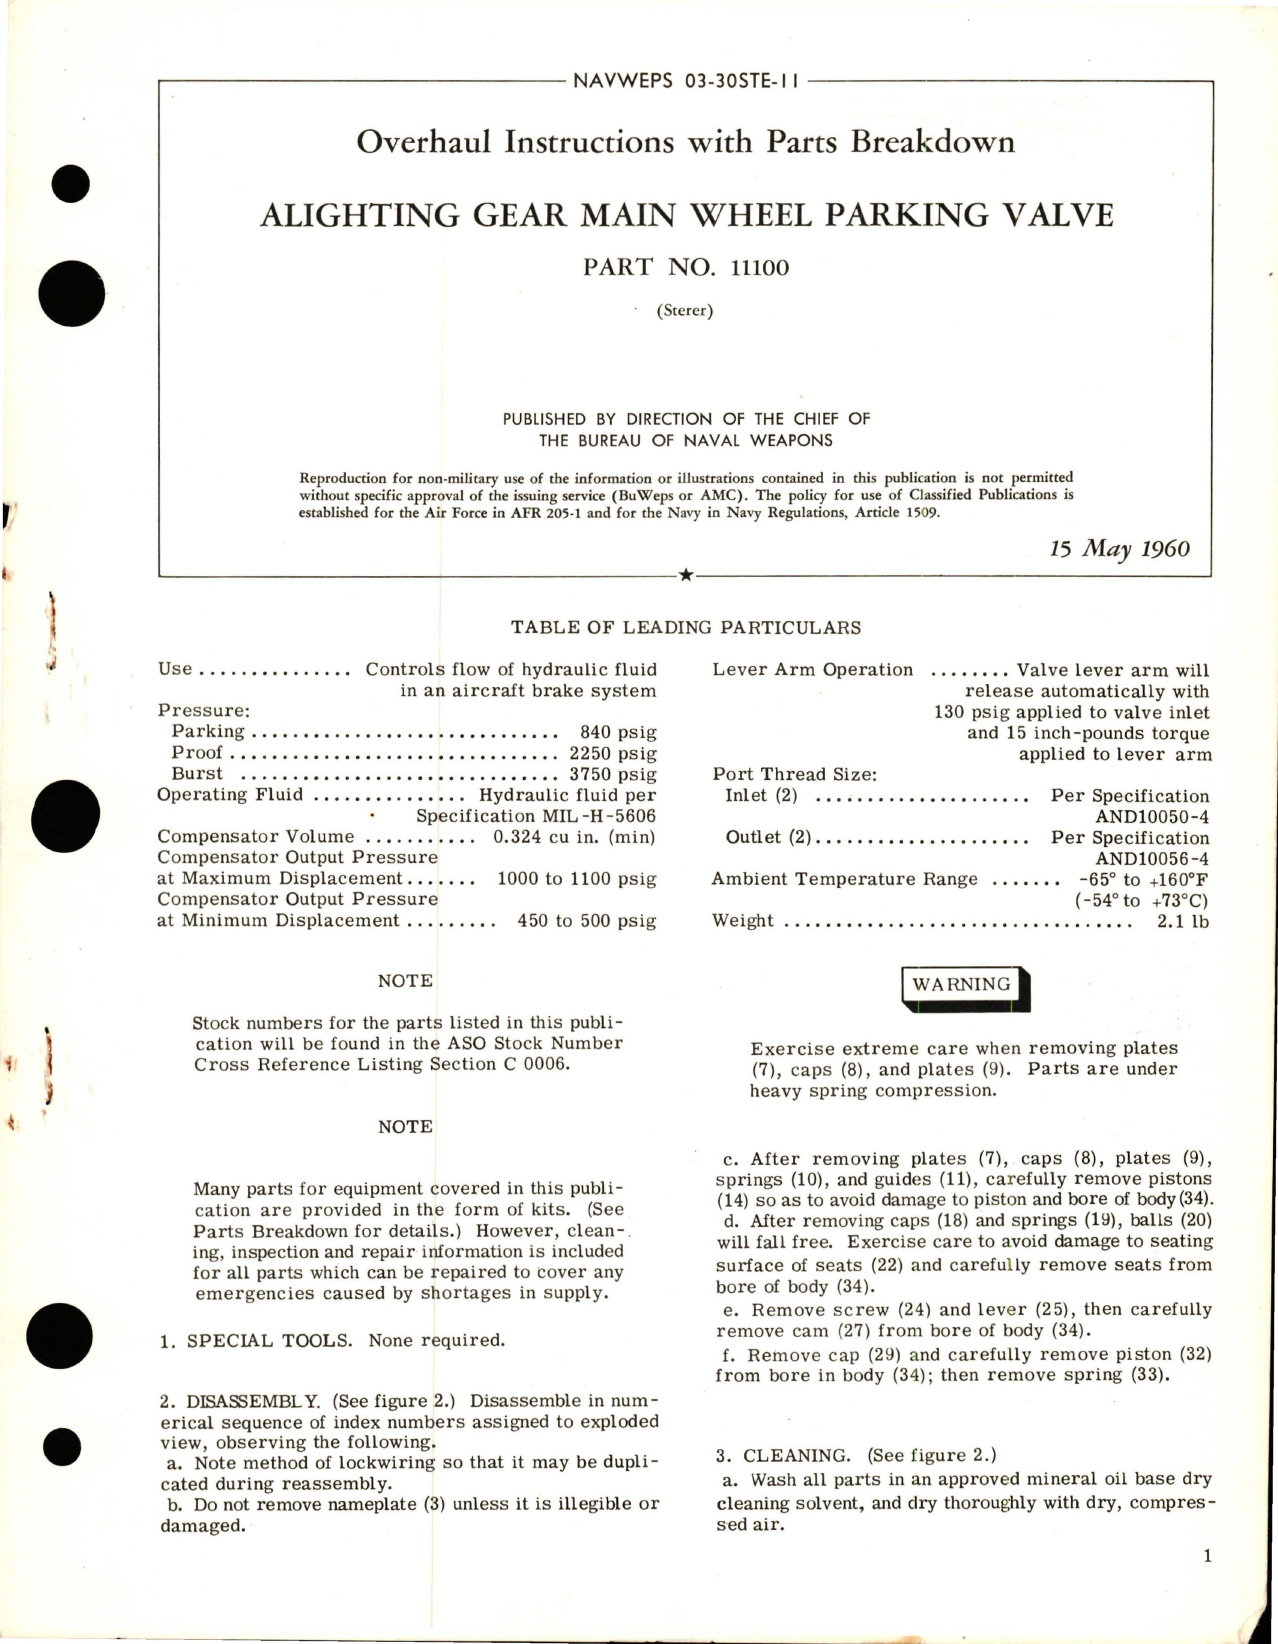 Sample page 1 from AirCorps Library document: Overhaul Instructions with Parts Breakdown for Alighting Gear Main Wheel Parking Valve - Part 11100